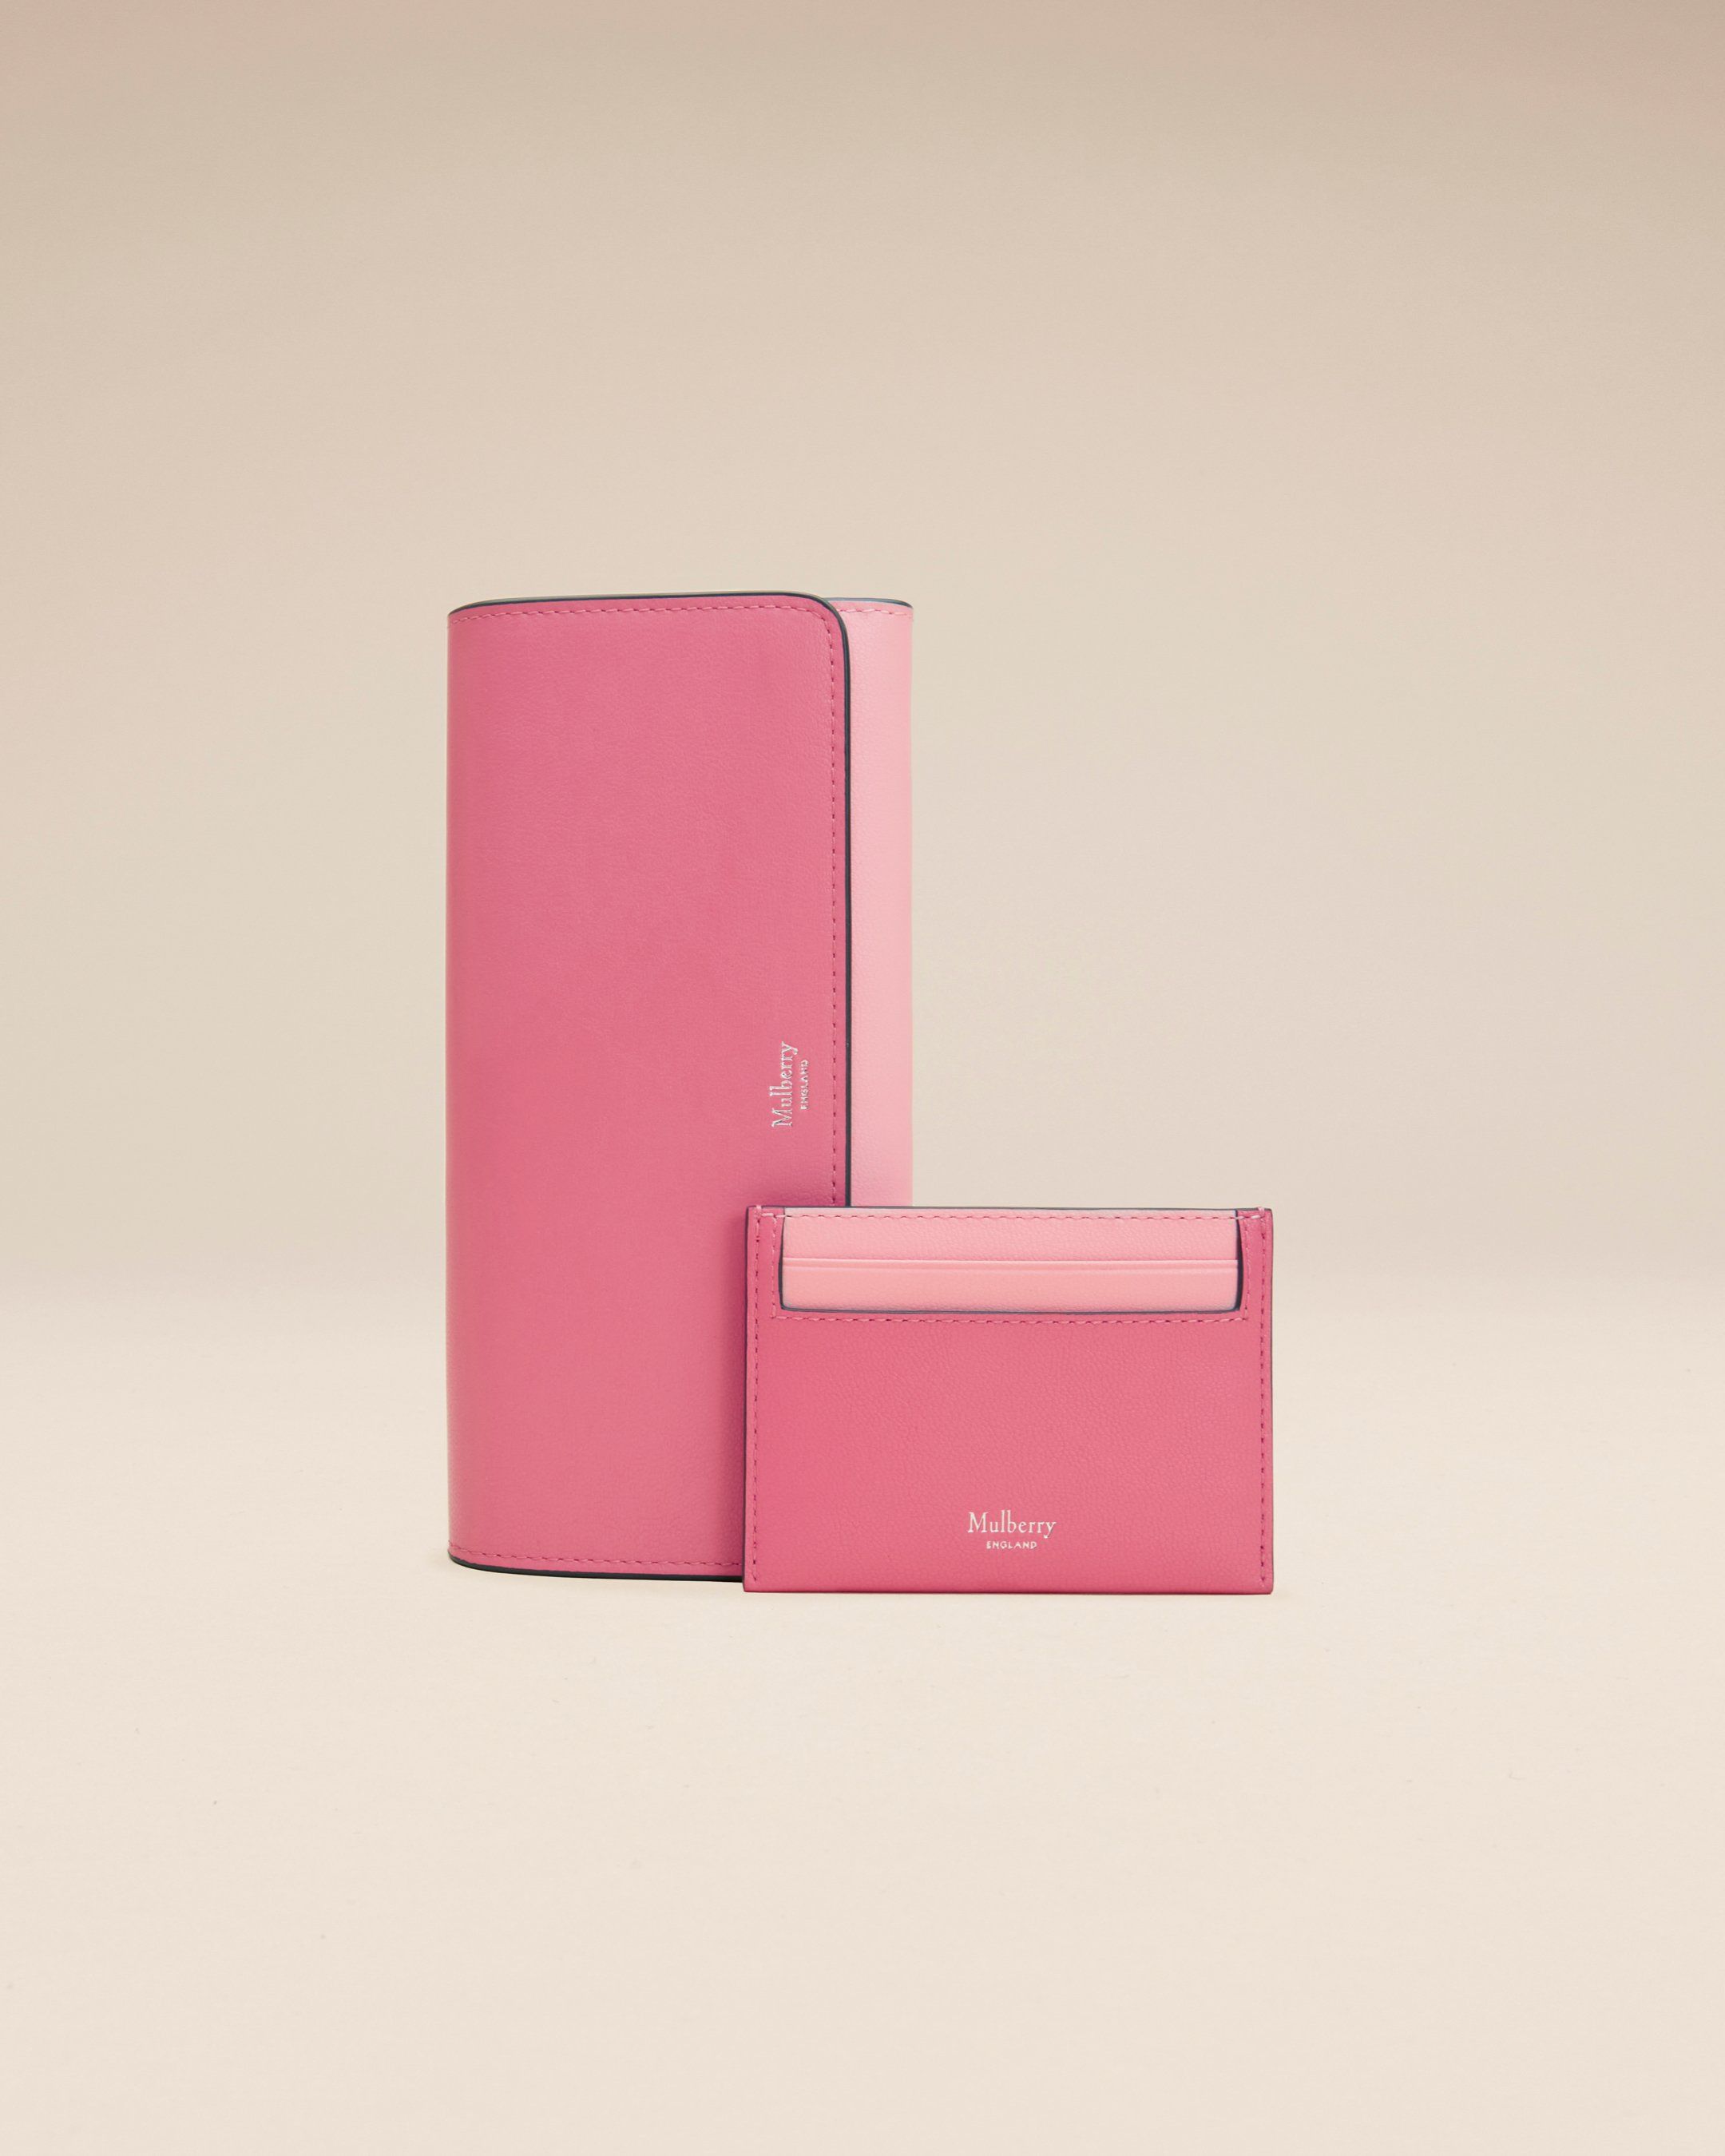 Mulberry continental wallet and card holder in geranium pink and powder rose